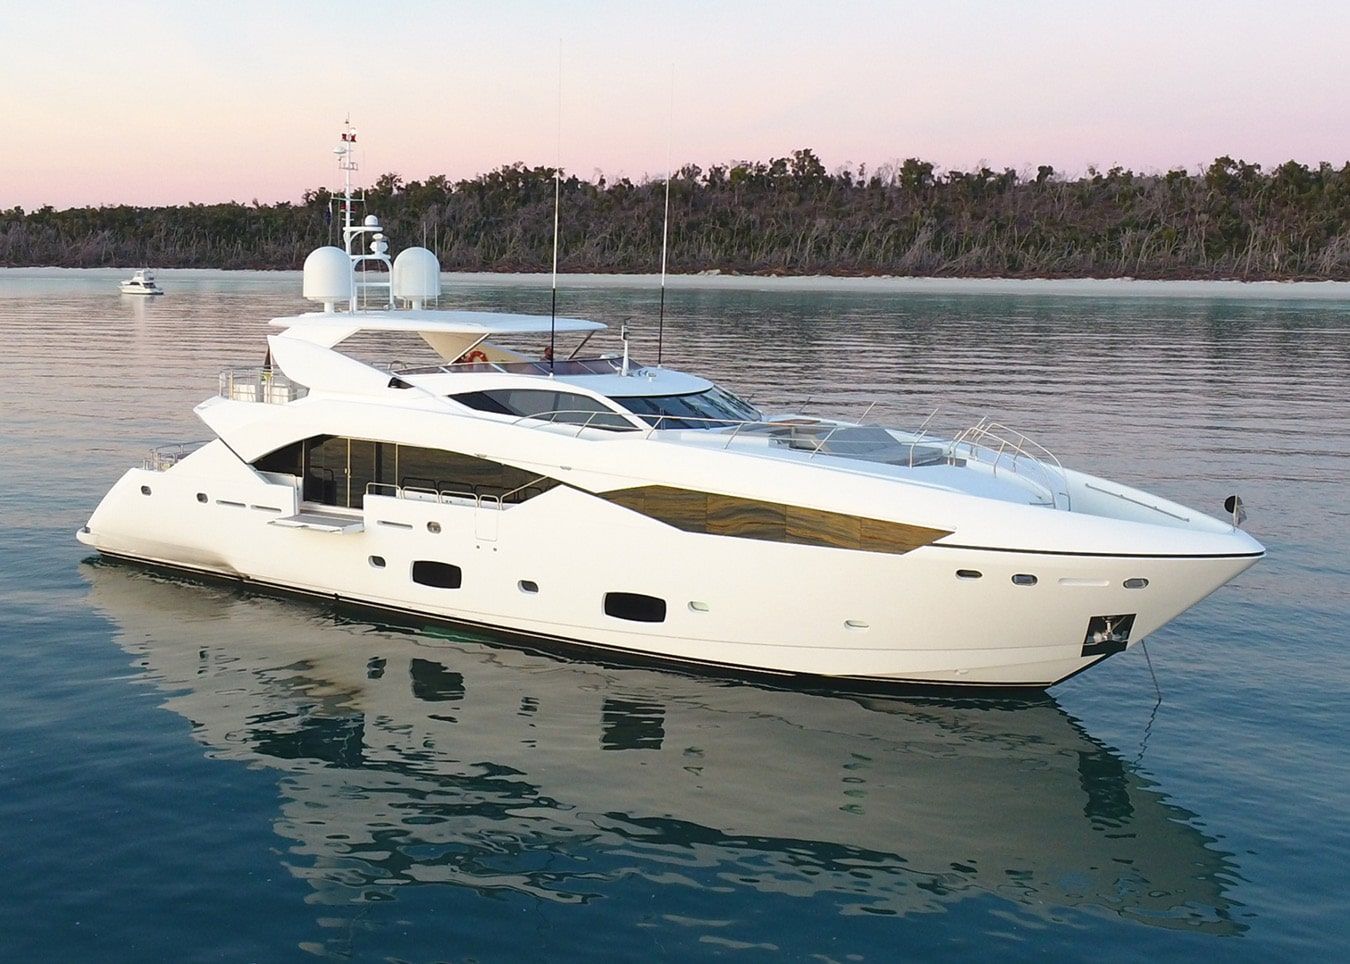 RASCAL | From $3,300 Per Hour | 60 Guests